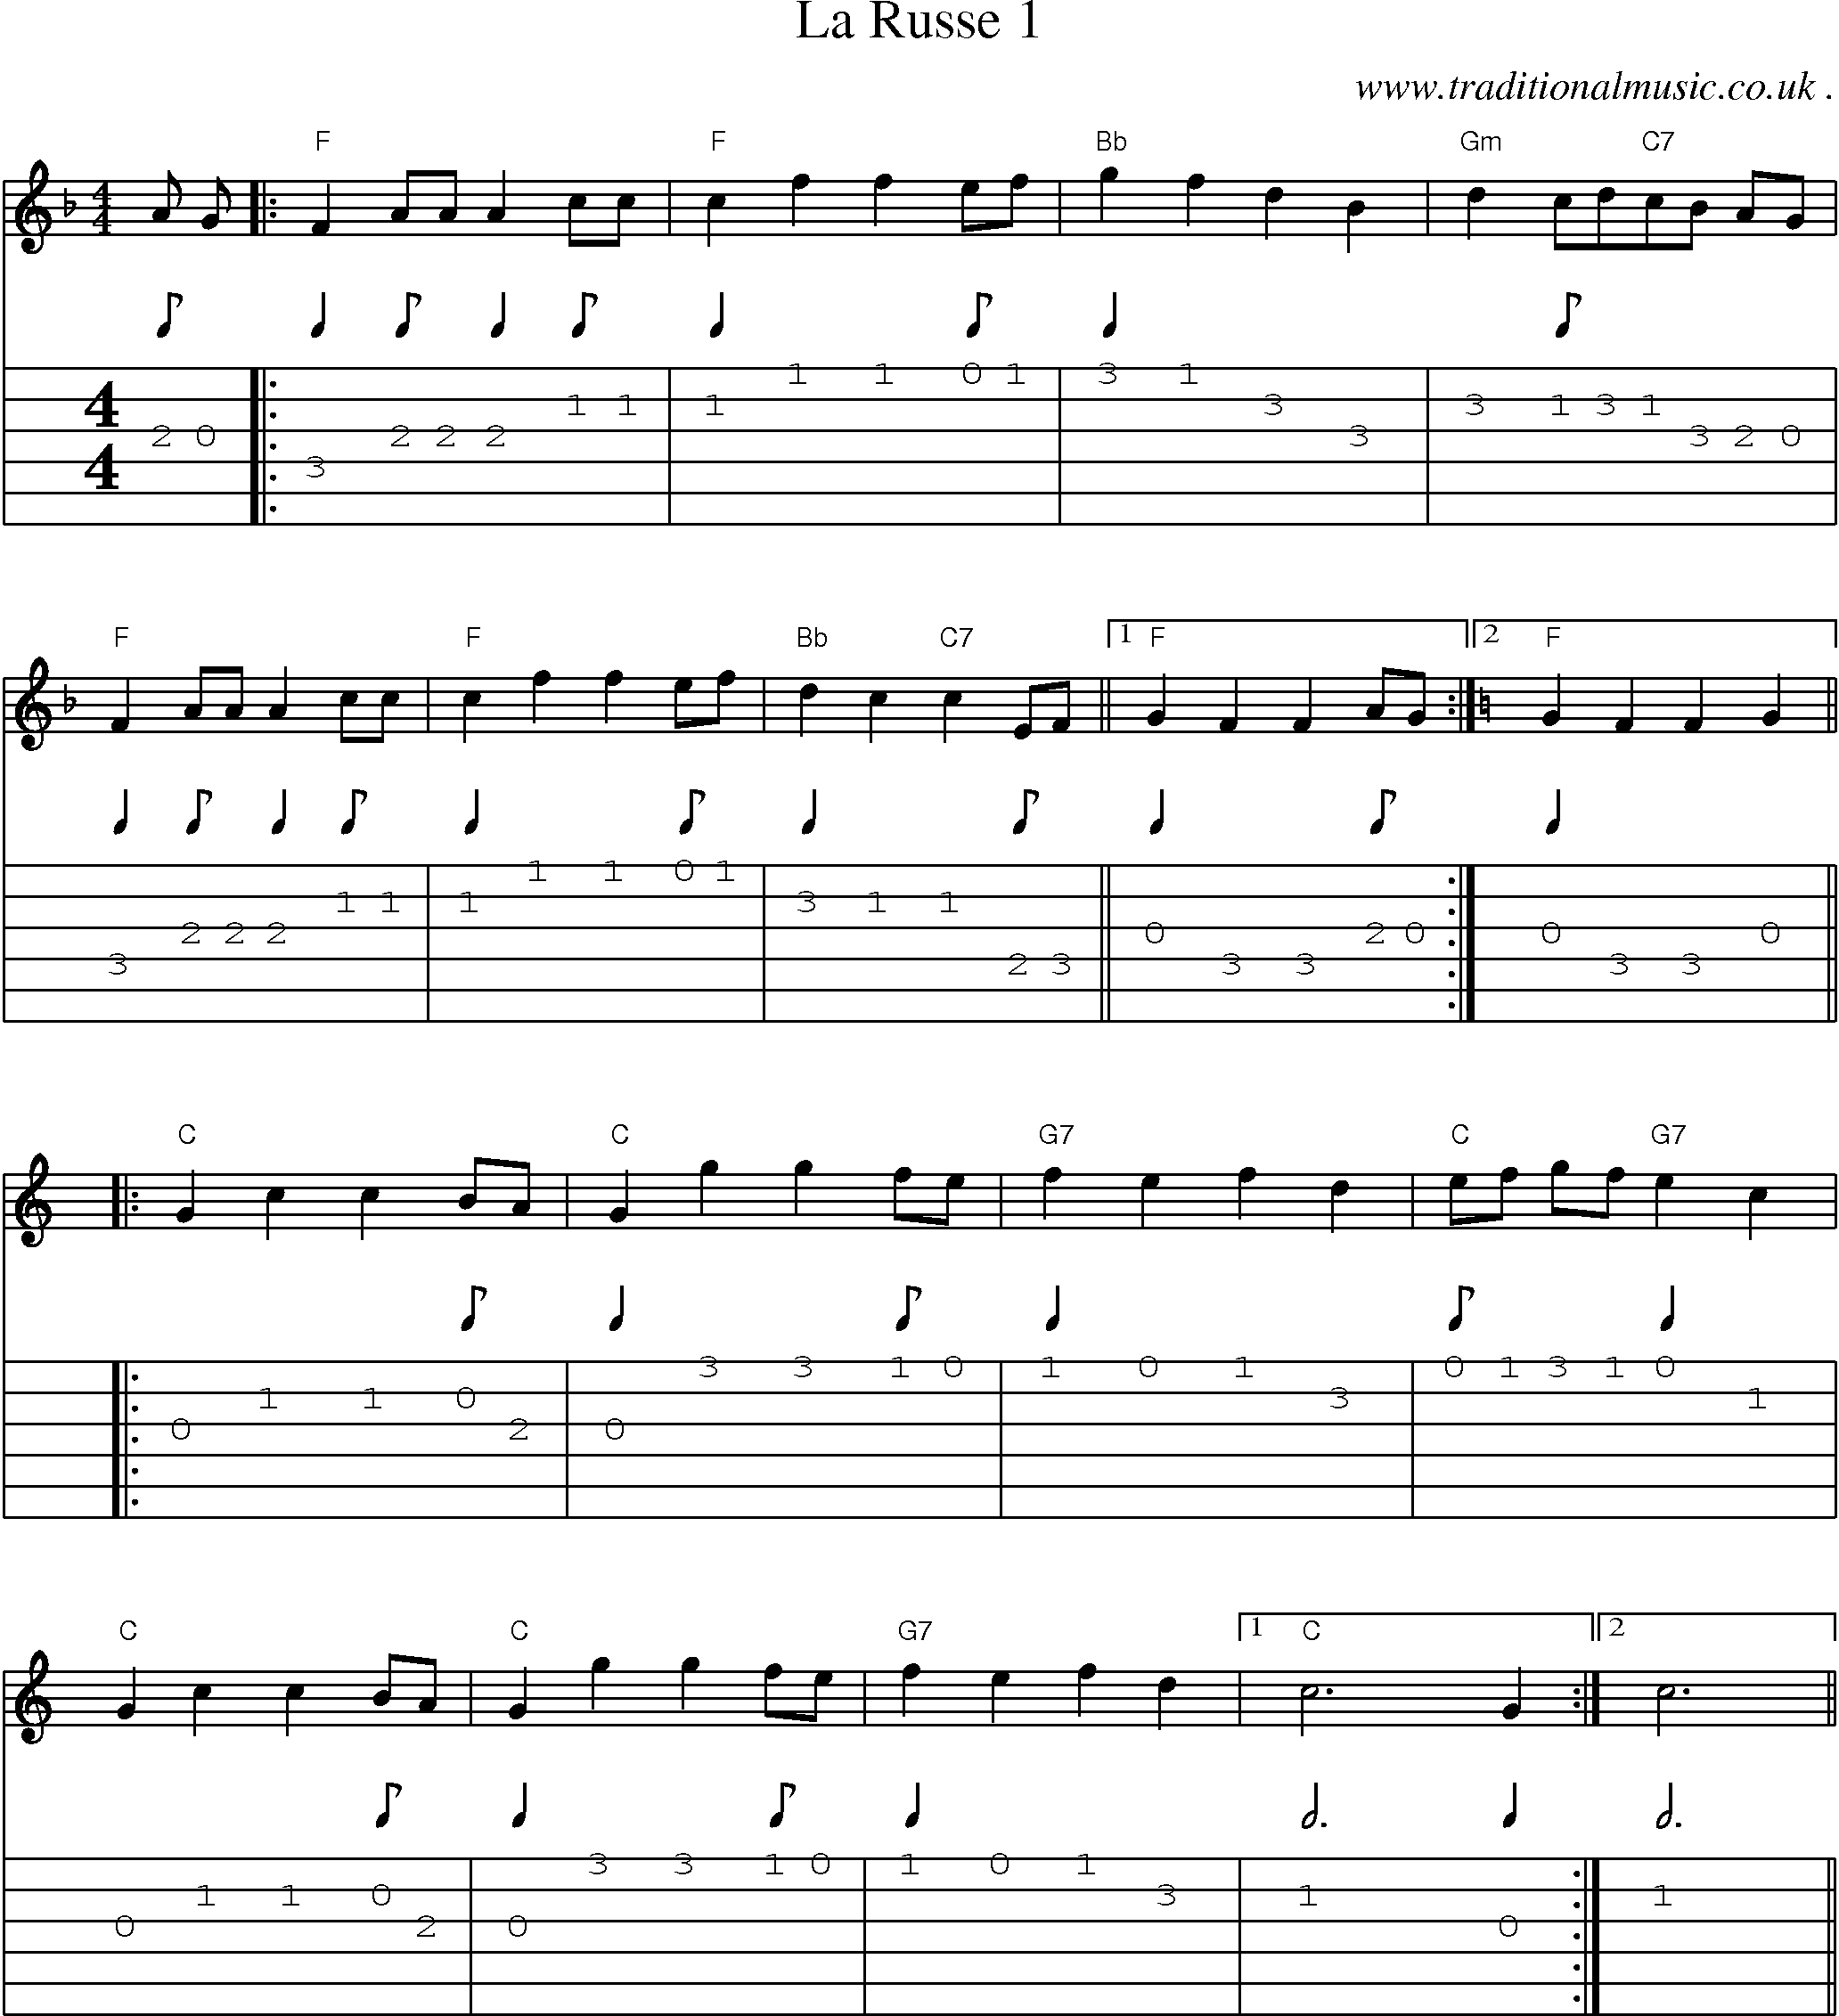 Sheet-Music and Guitar Tabs for La Russe 1